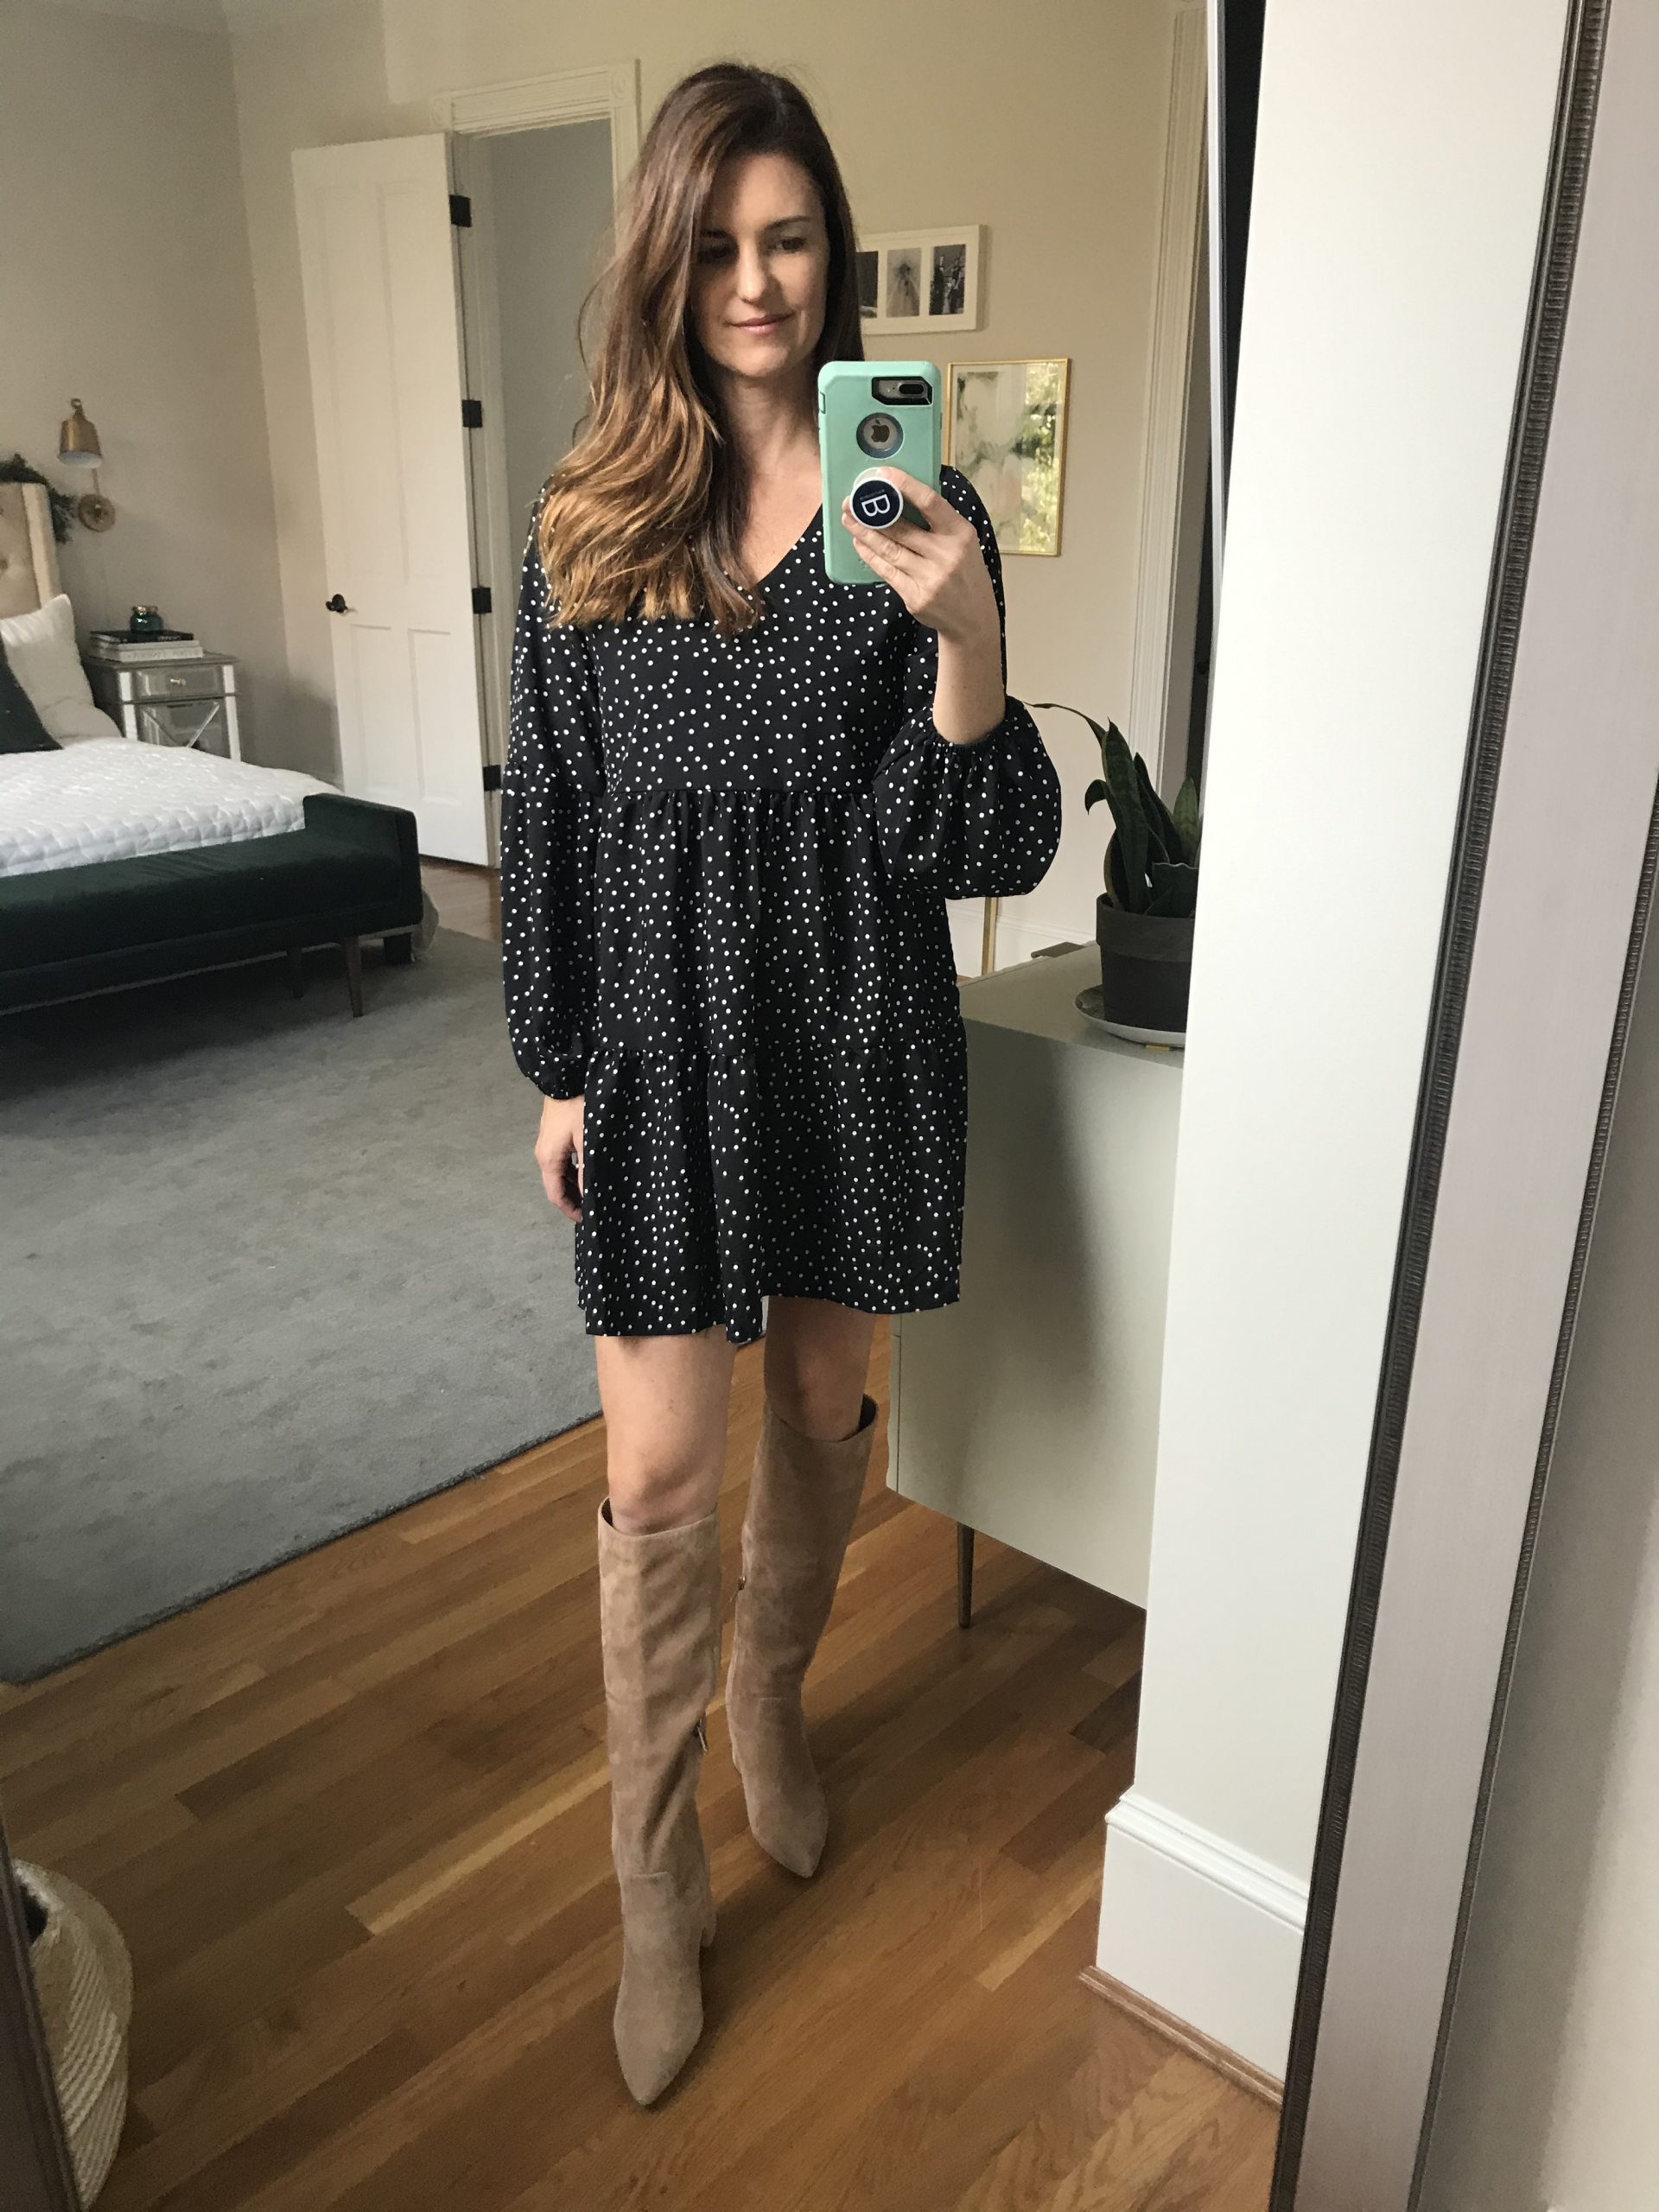 Amazon dress and boots, best fall dresses, fall style, fashion bloggers we love, finding beauty mom outfit ideas